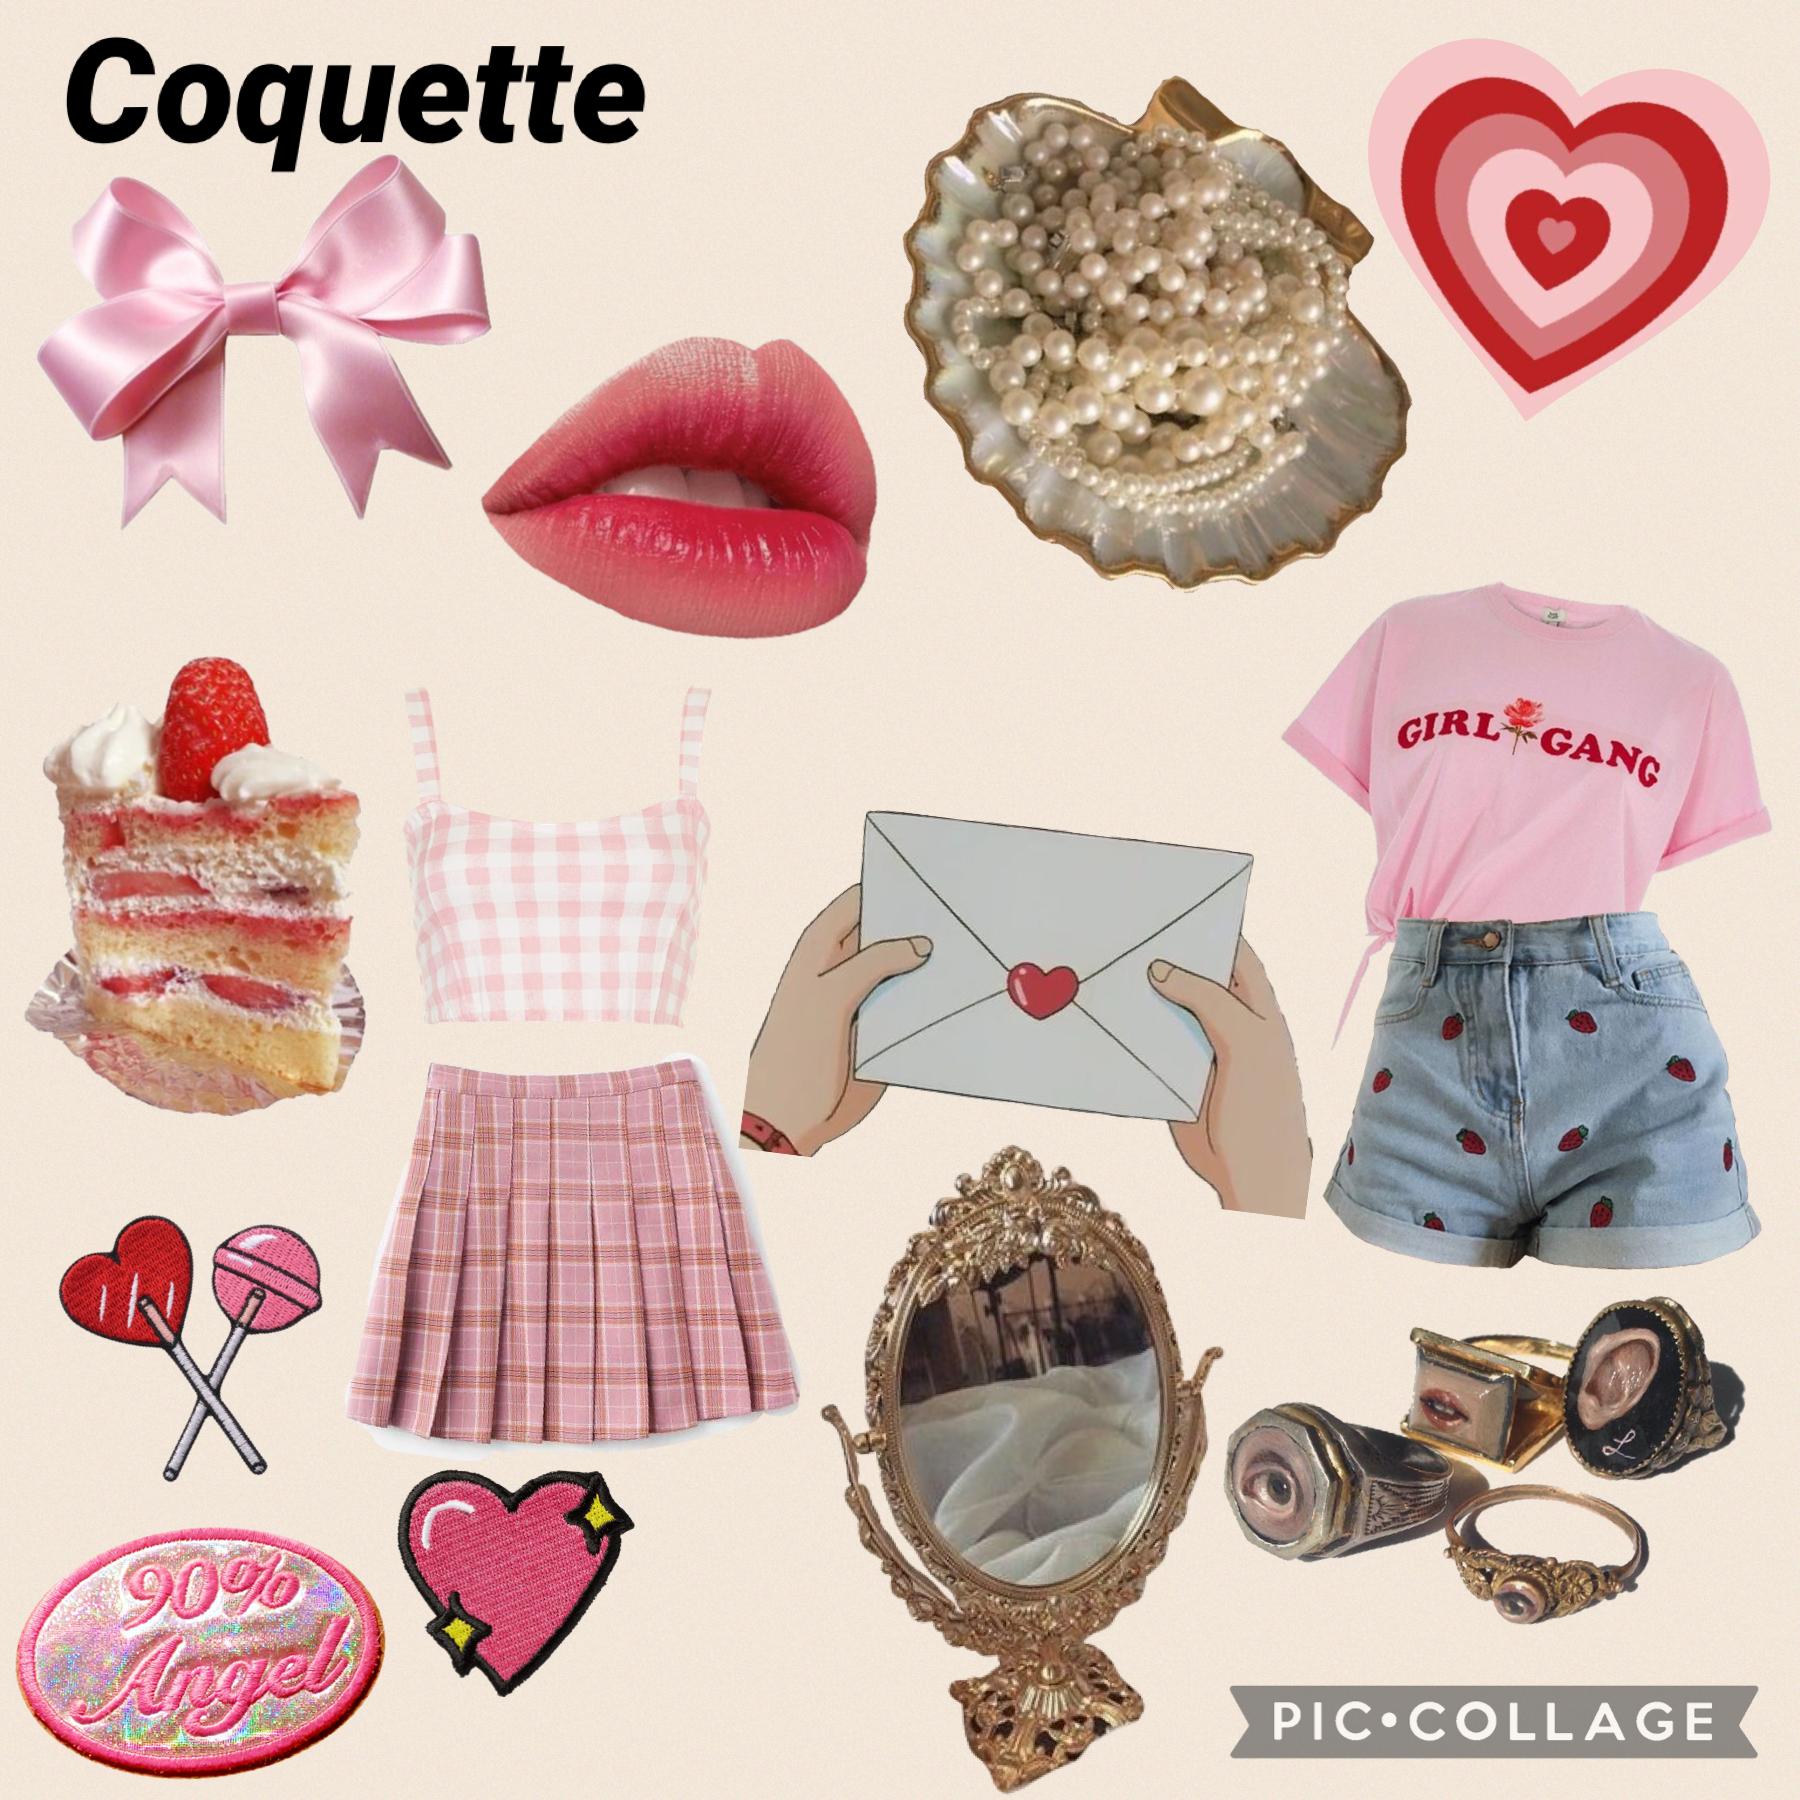 Coquette ✌️ I was knew to this one so I tried my best